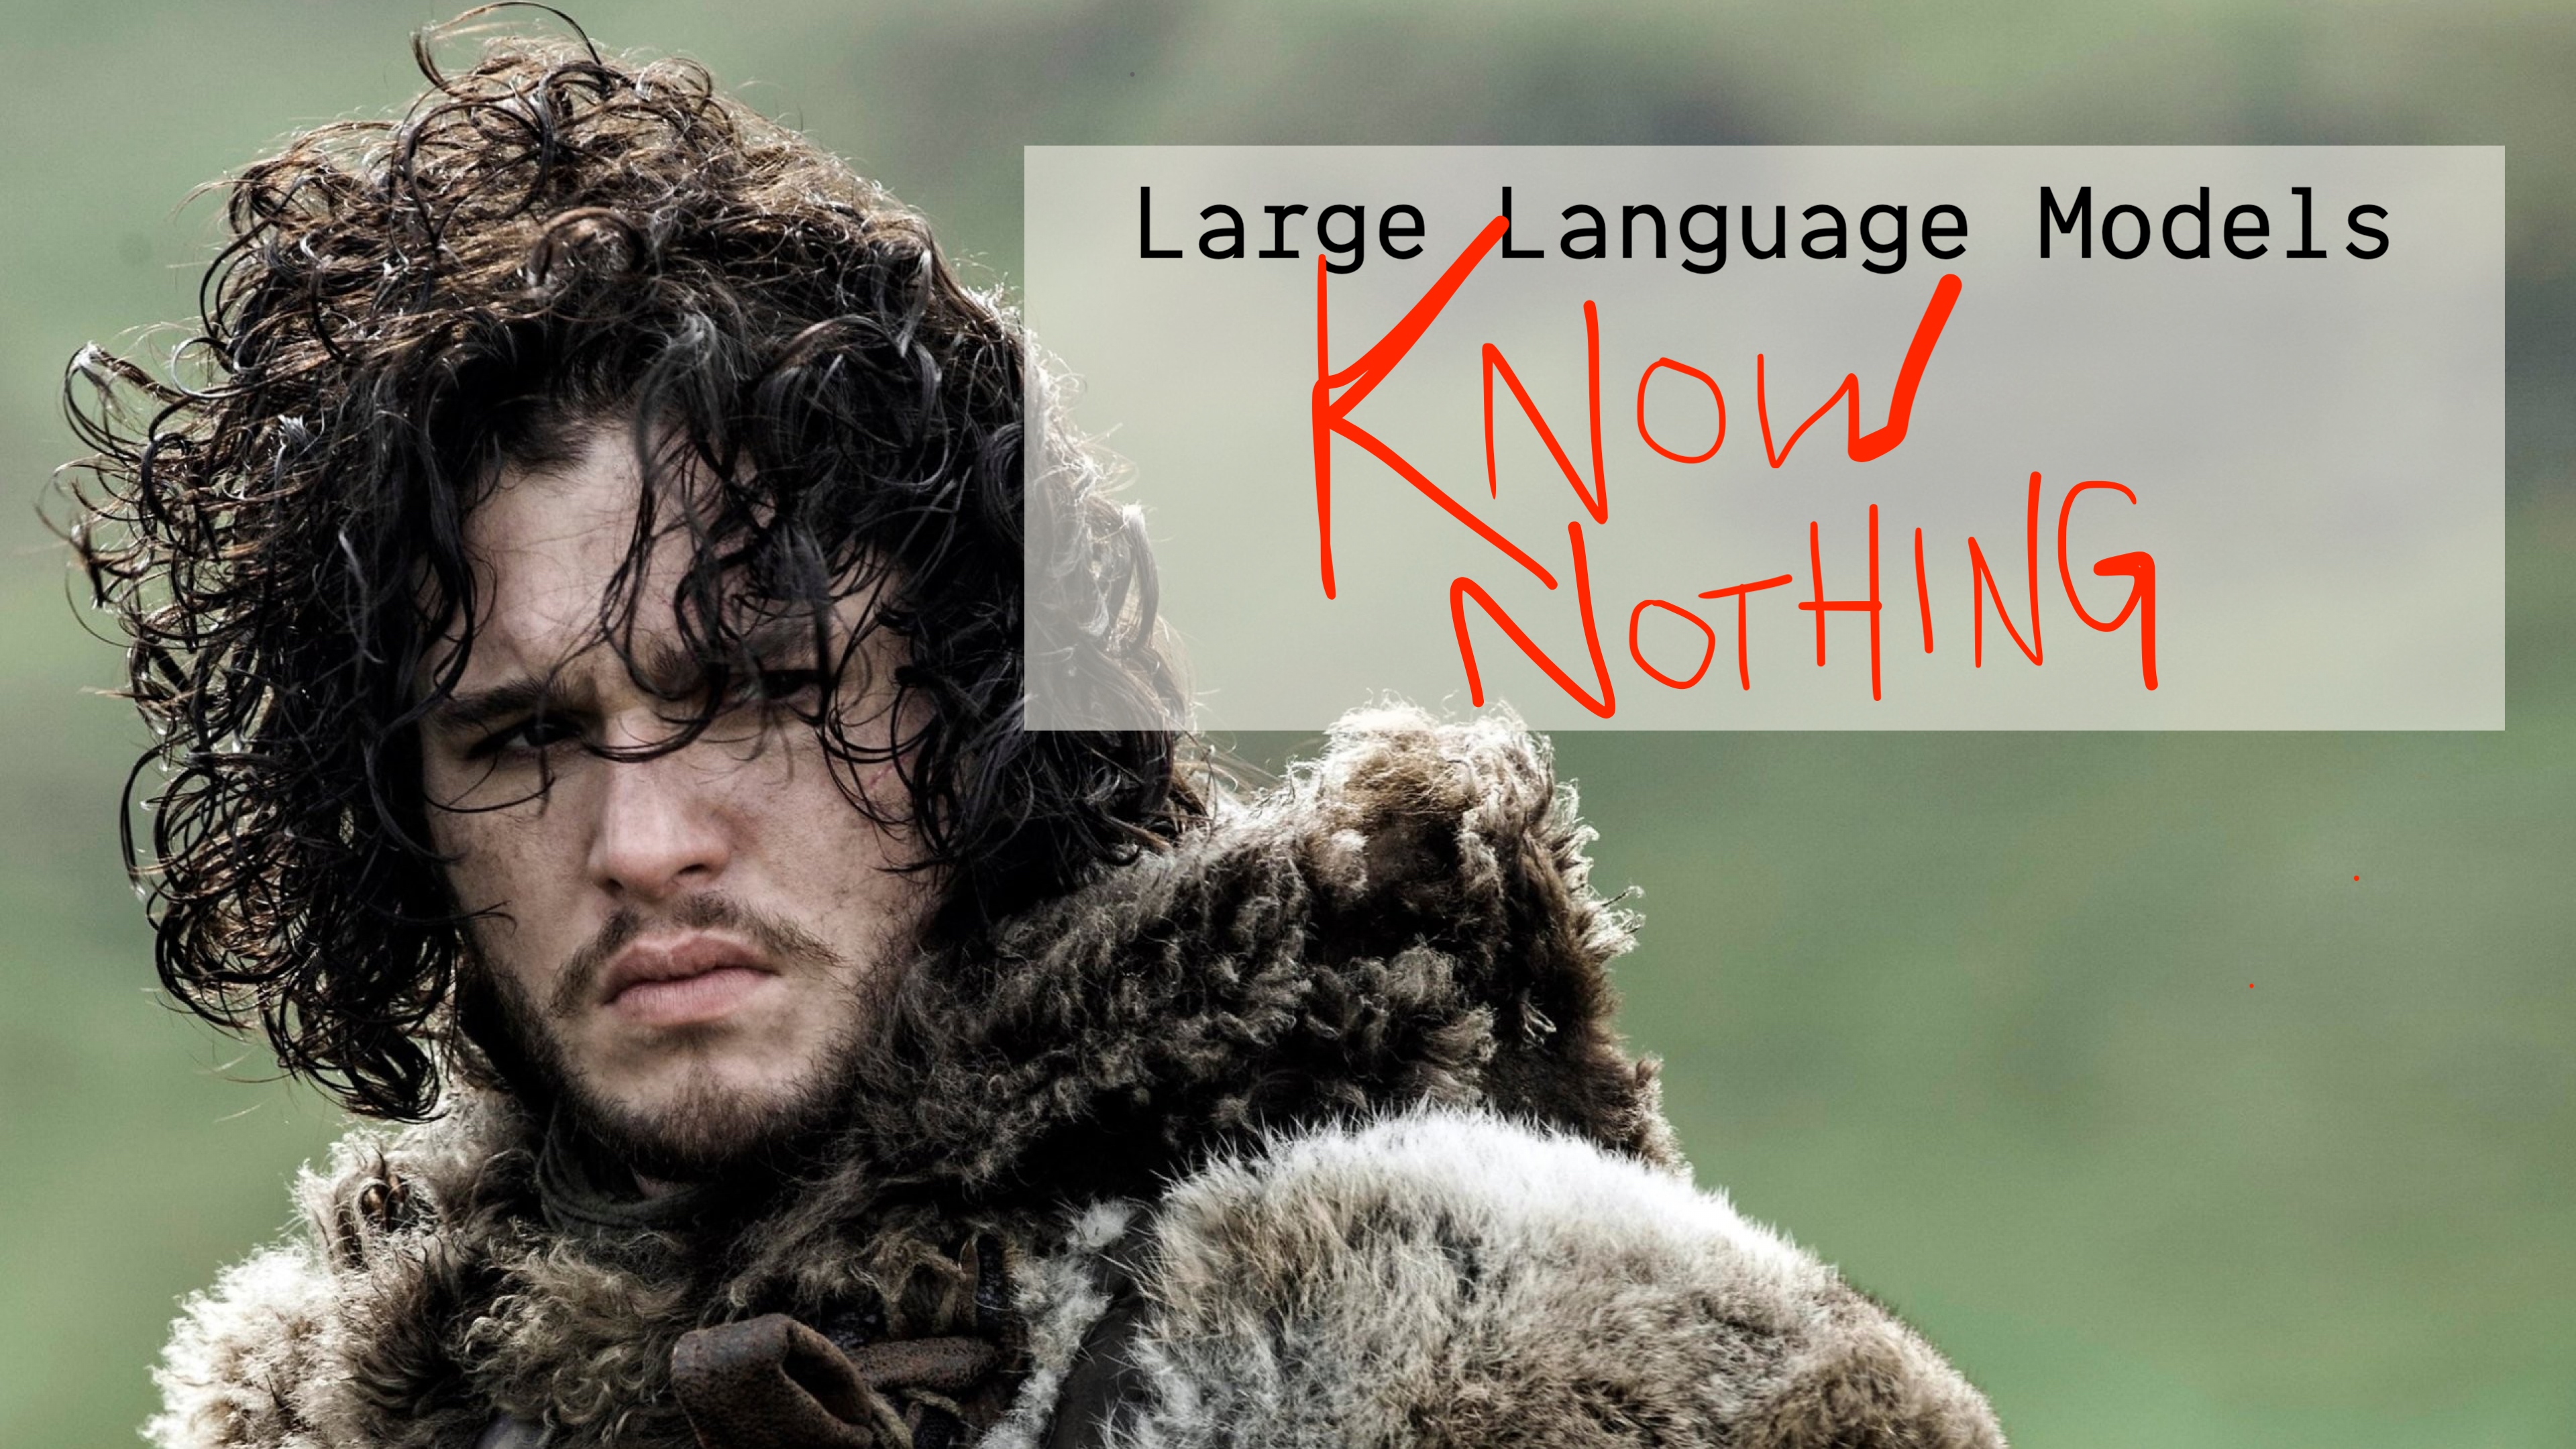 Image of John Snow from Game of Throwns labeled 'Large Language Models know nothing'
